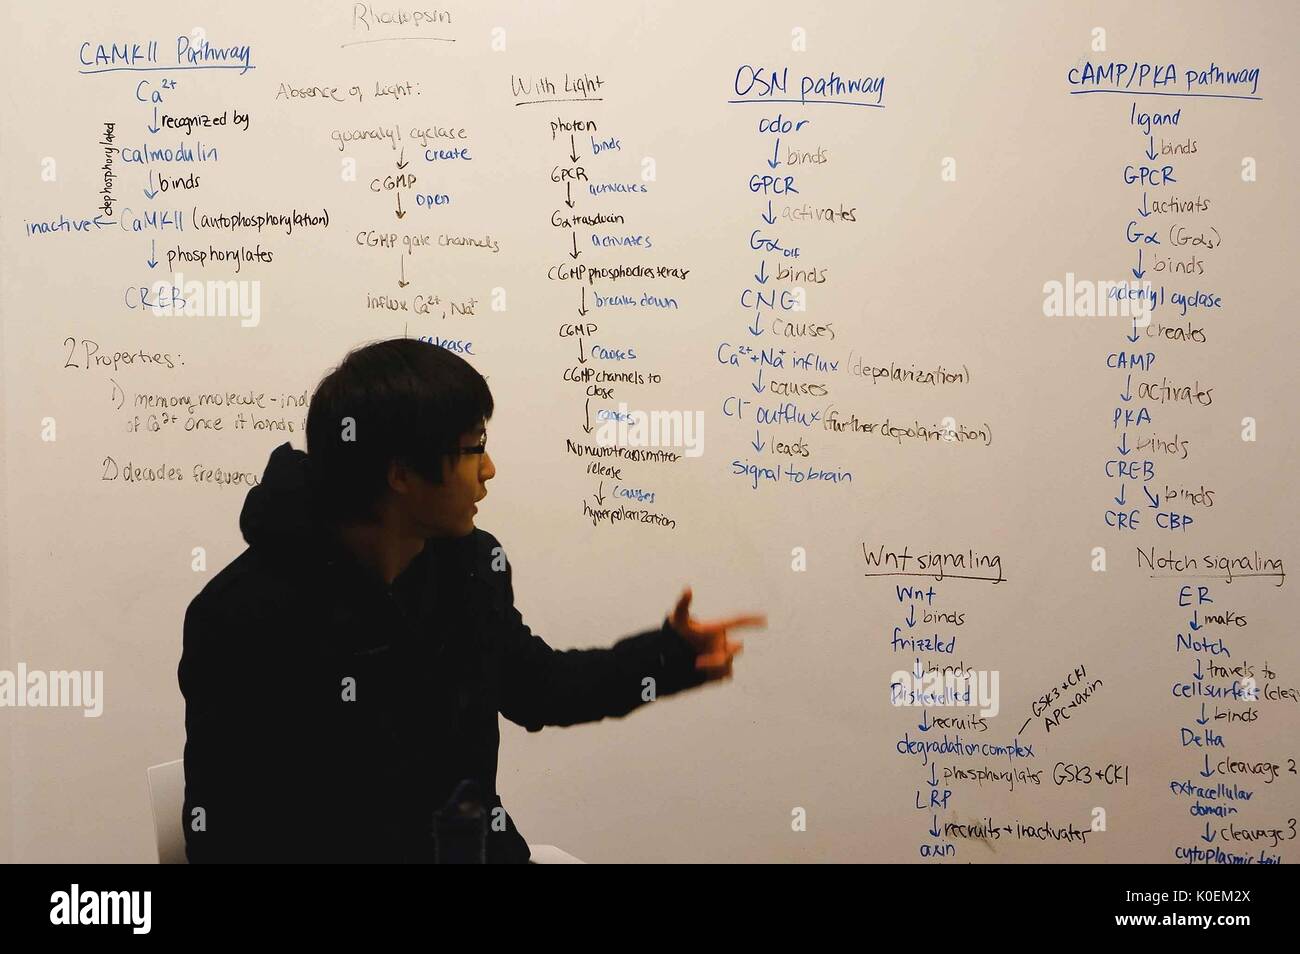 A college student sitting in front of a white board wall in a study room in Brody Learning Commons on the Homewood Campus, he is pointing to some of his notes on the wall behind him, 2015. Courtesy Eric Chen. Stock Photo